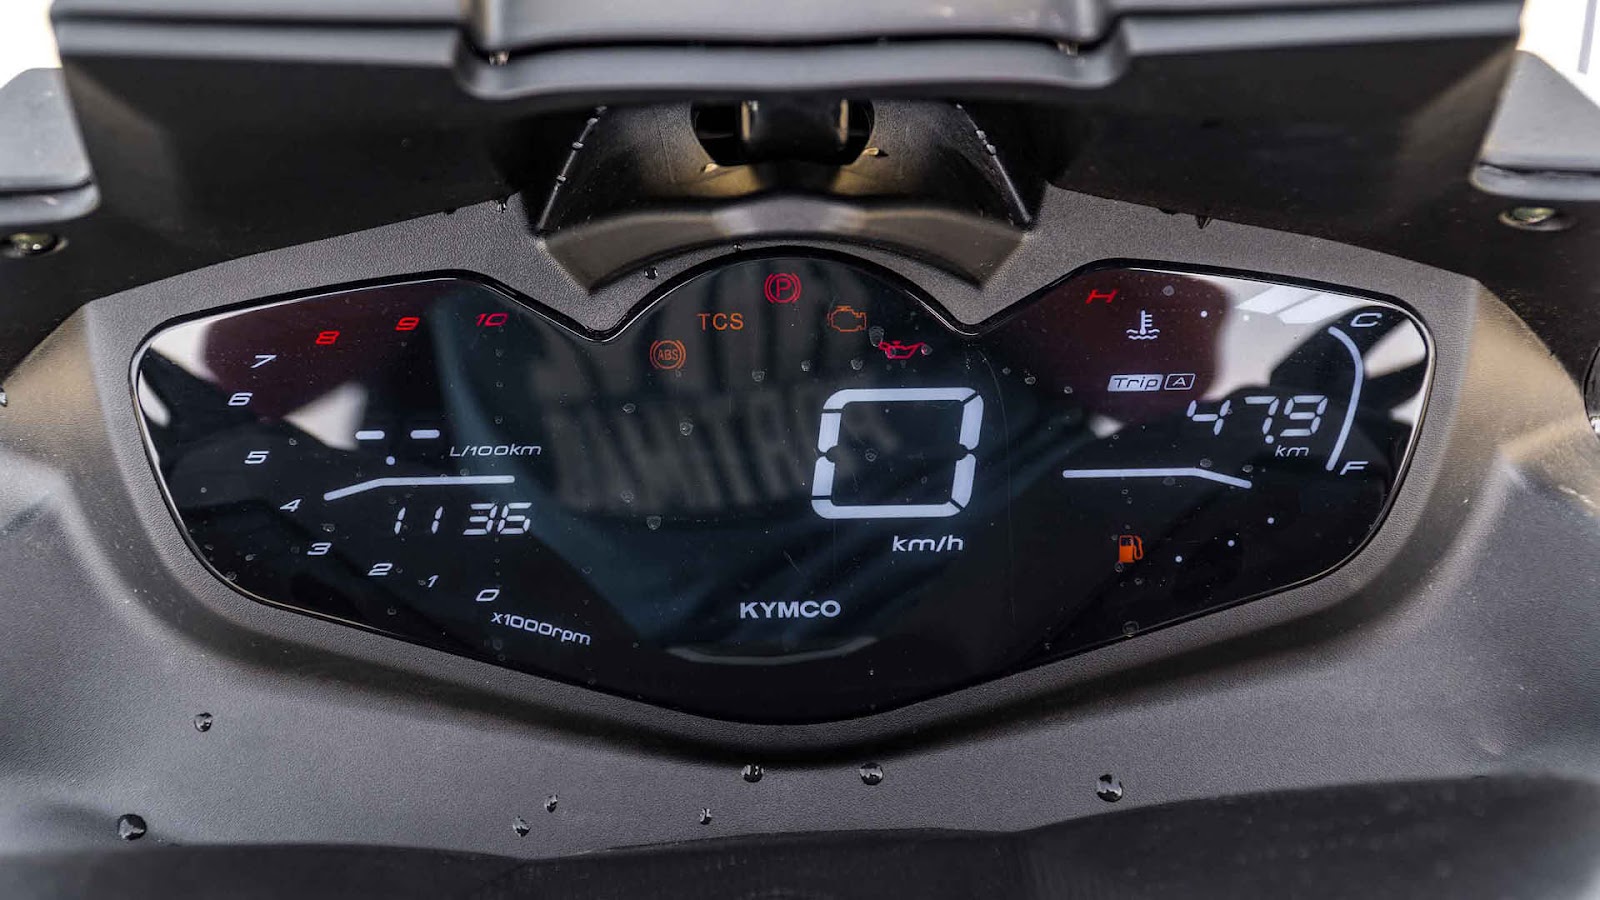 The instrumentation with onboard computer is comprehensive enough, displaying the instant speed prominently.